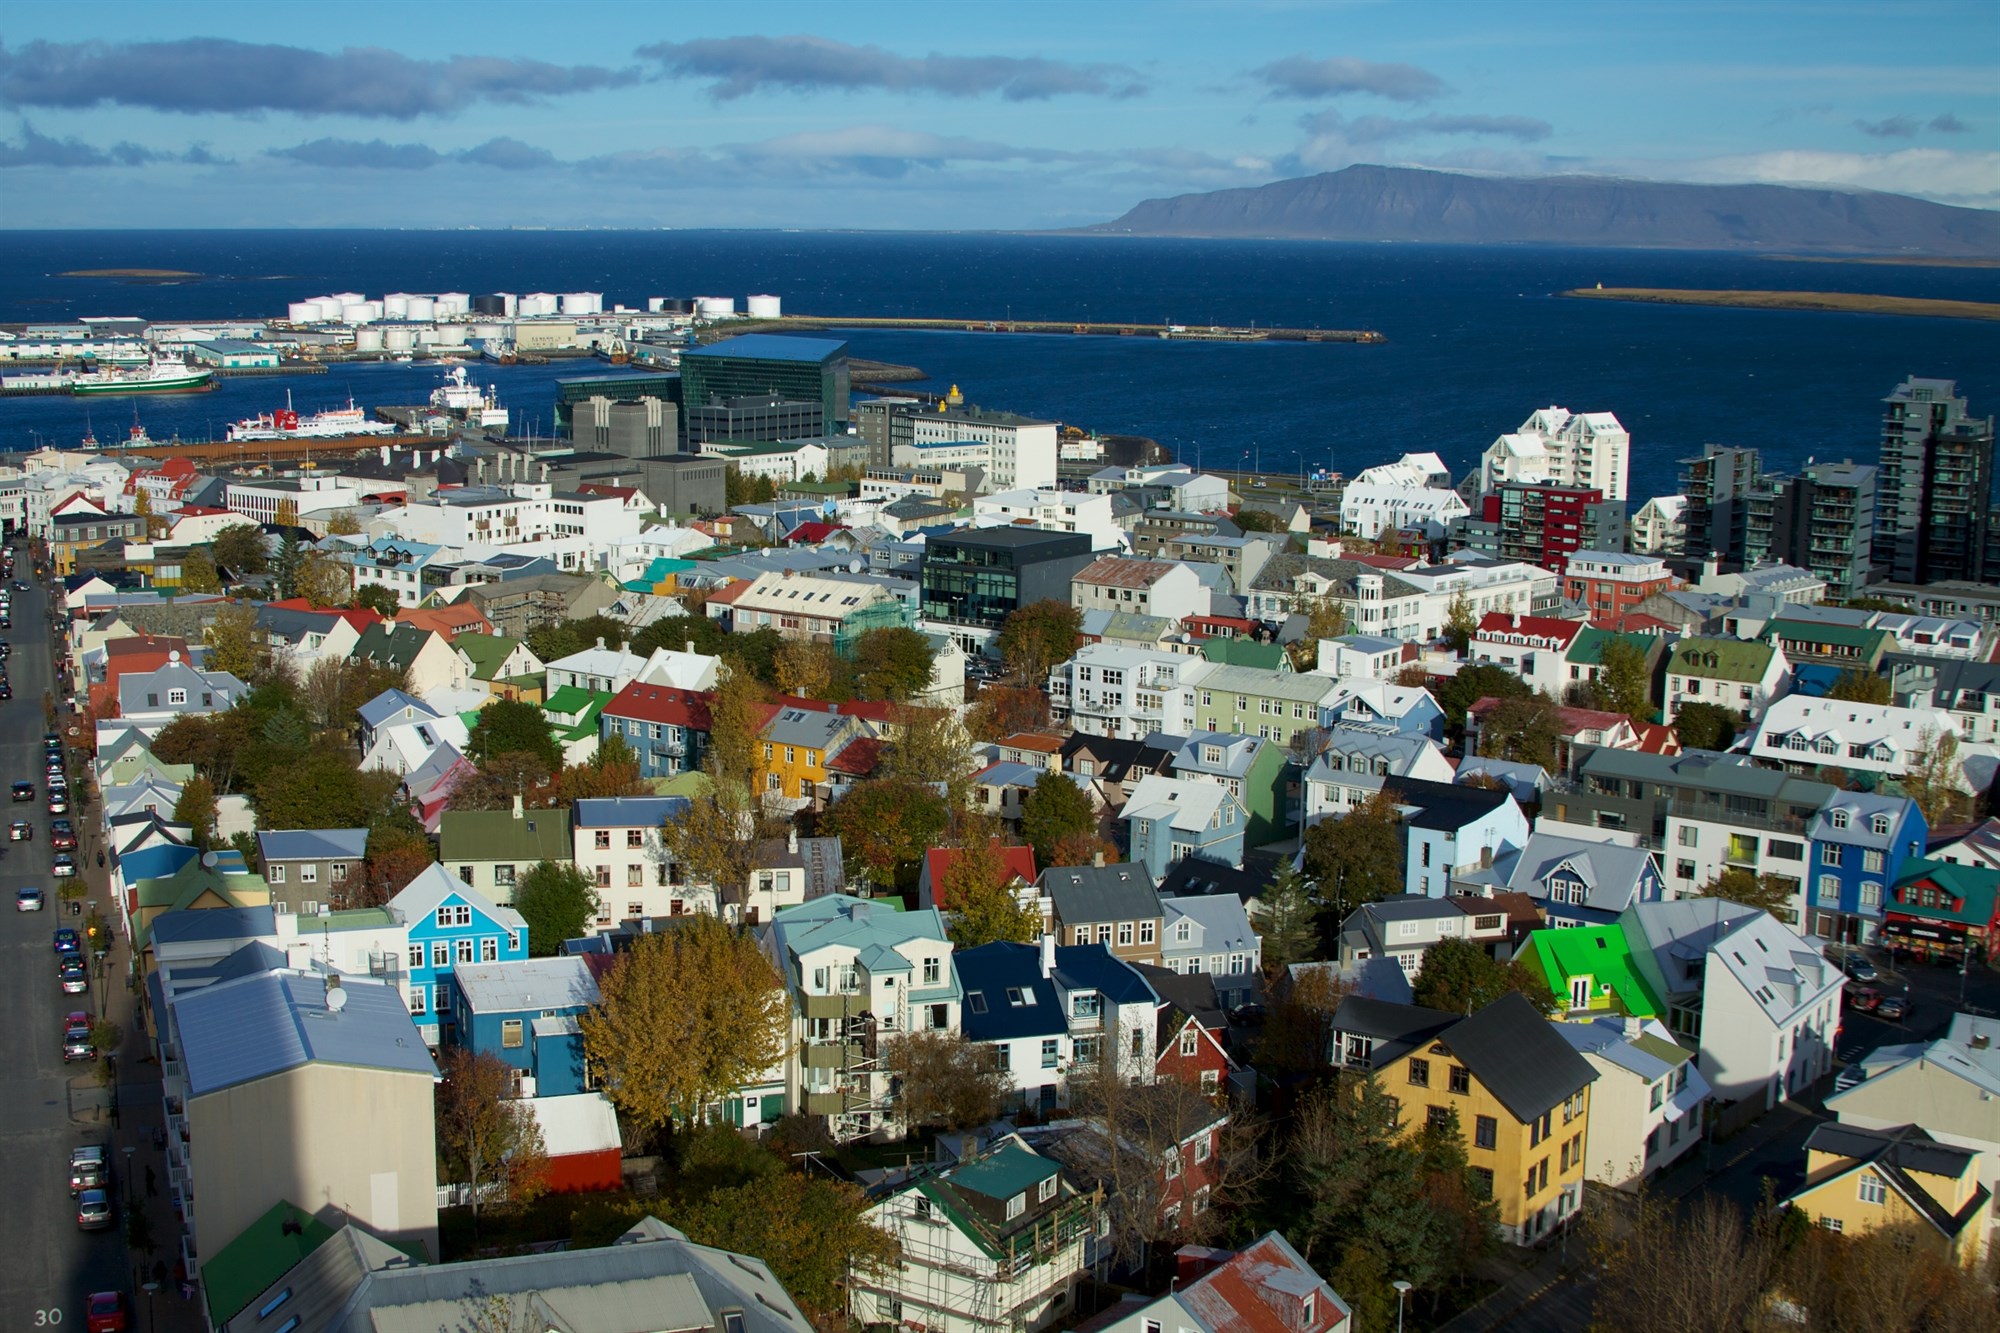 Soak Up Some Culture at Reykjavik's Best Museums and Galleries